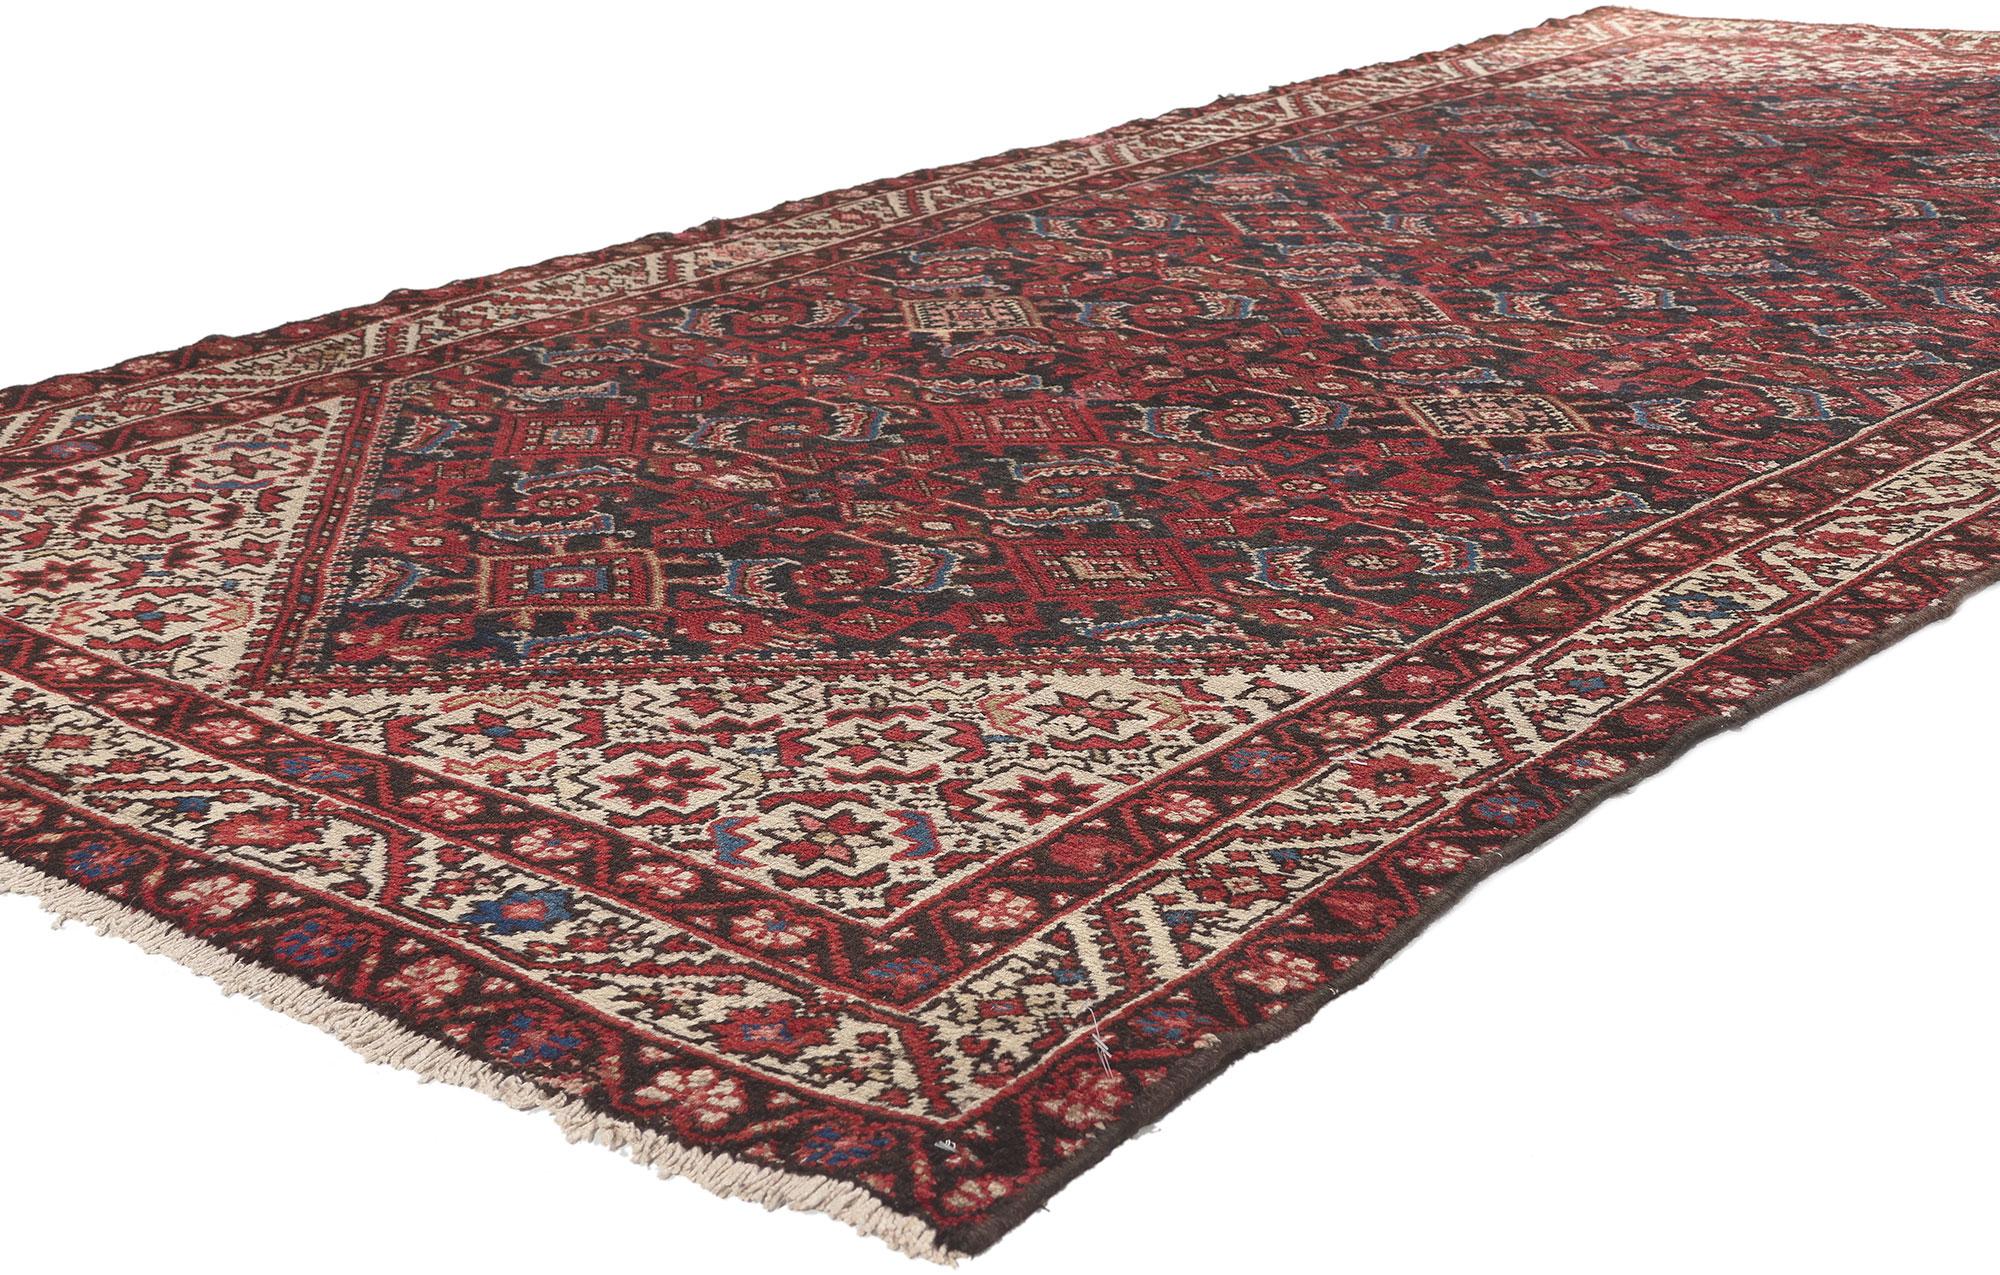 74943 Vintage Persian Hamadan Rug, 05'00 x 09'10.
Decidedly dapper meets laid-back luxury in this vintage Persian Hamadan rug. The geometric masculine design and moody hues woven into this piece work together conveying quiet sophistication with an